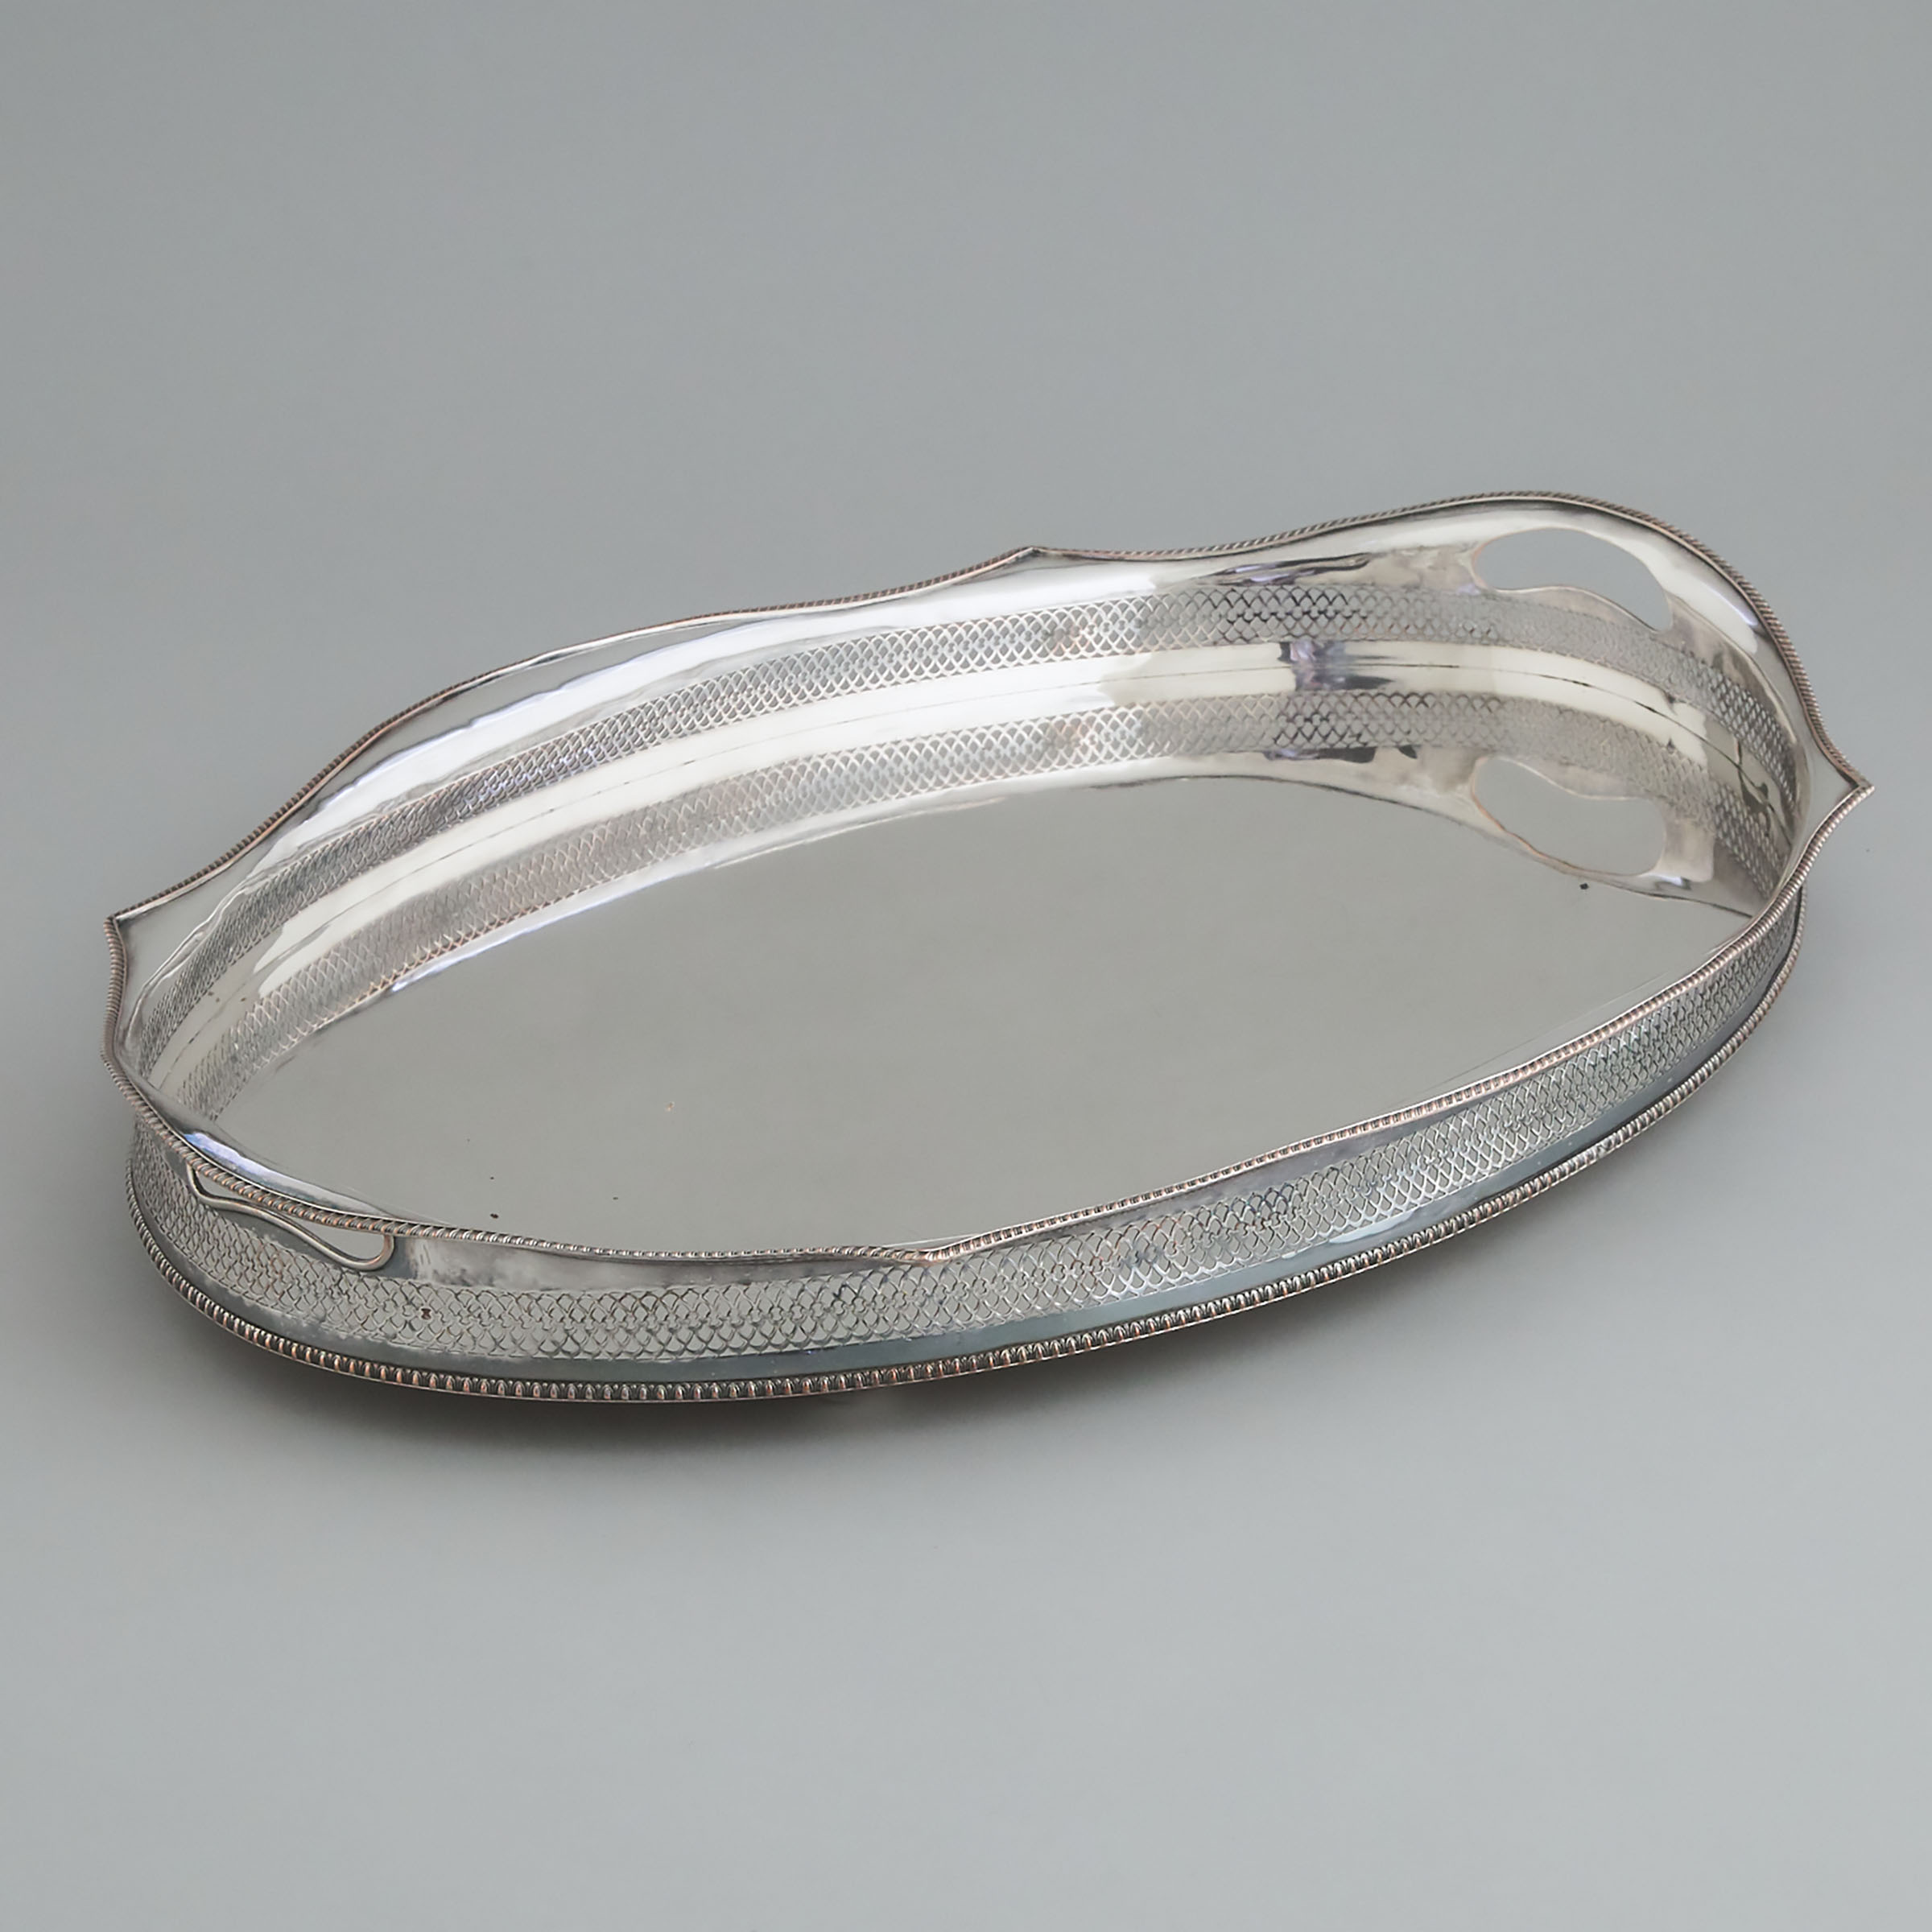 English Silver Plated Two-Handled Oval Galleried Serving Tray, 20th century